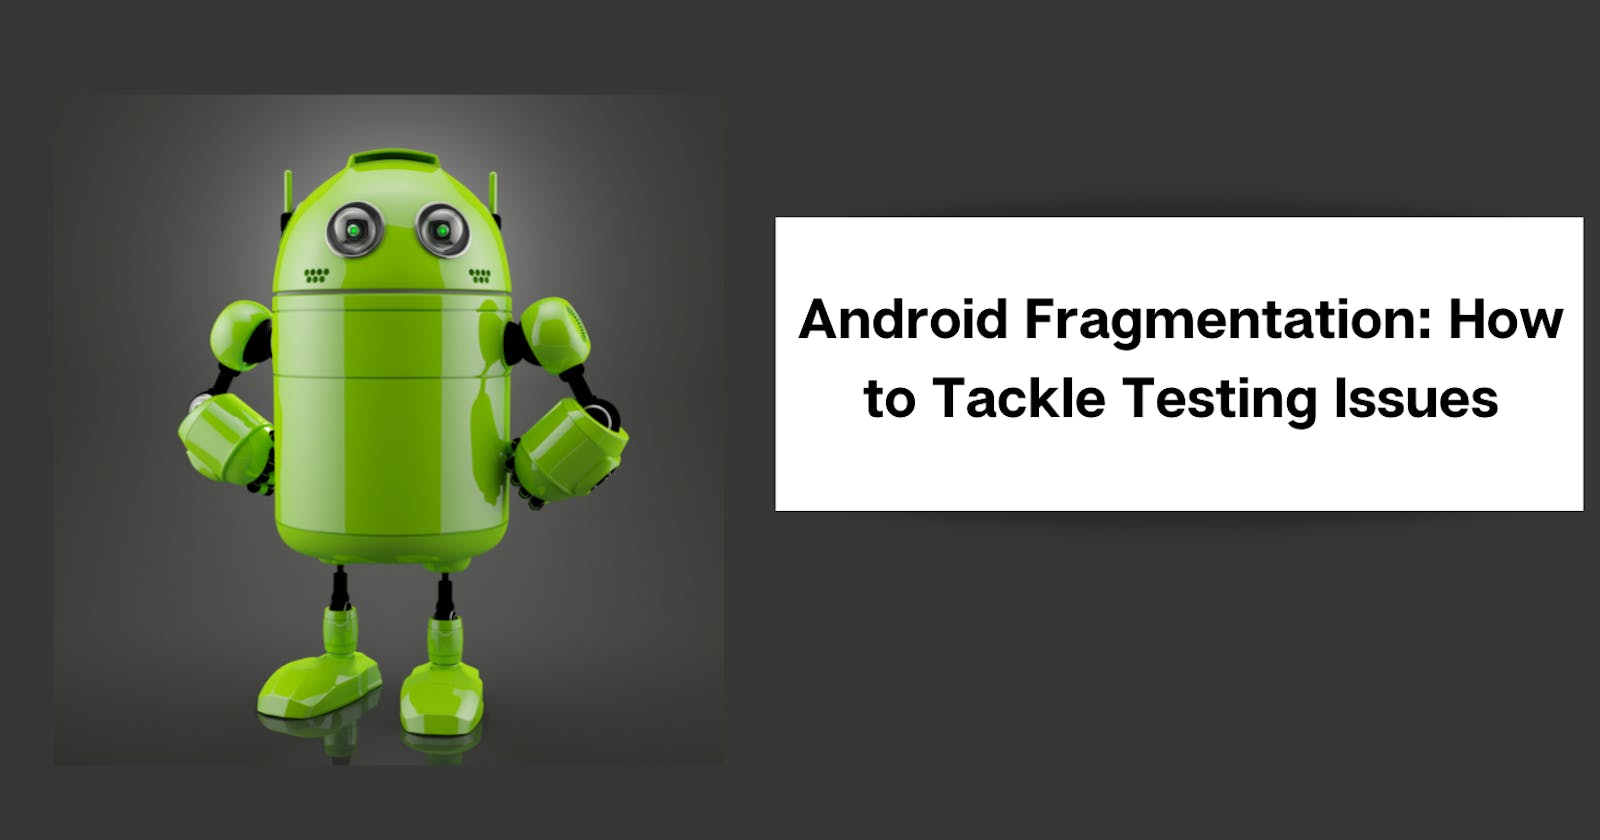 Android Fragmentation: How to Tackle Testing Issues